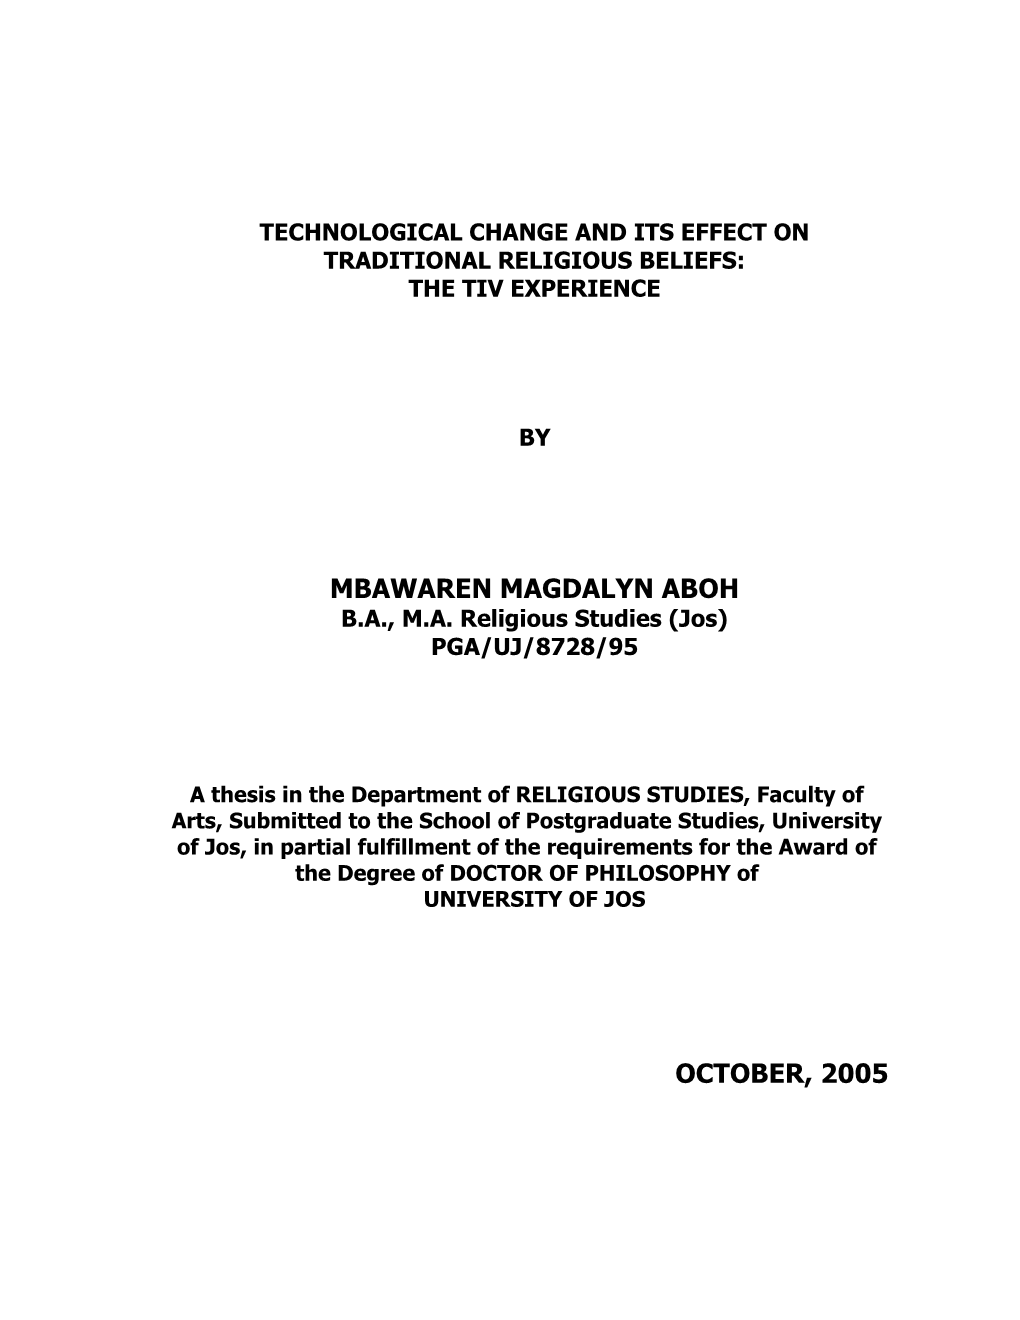 Technological Change and Its Effect on Traditional Religious Beliefs: the Tiv Experience